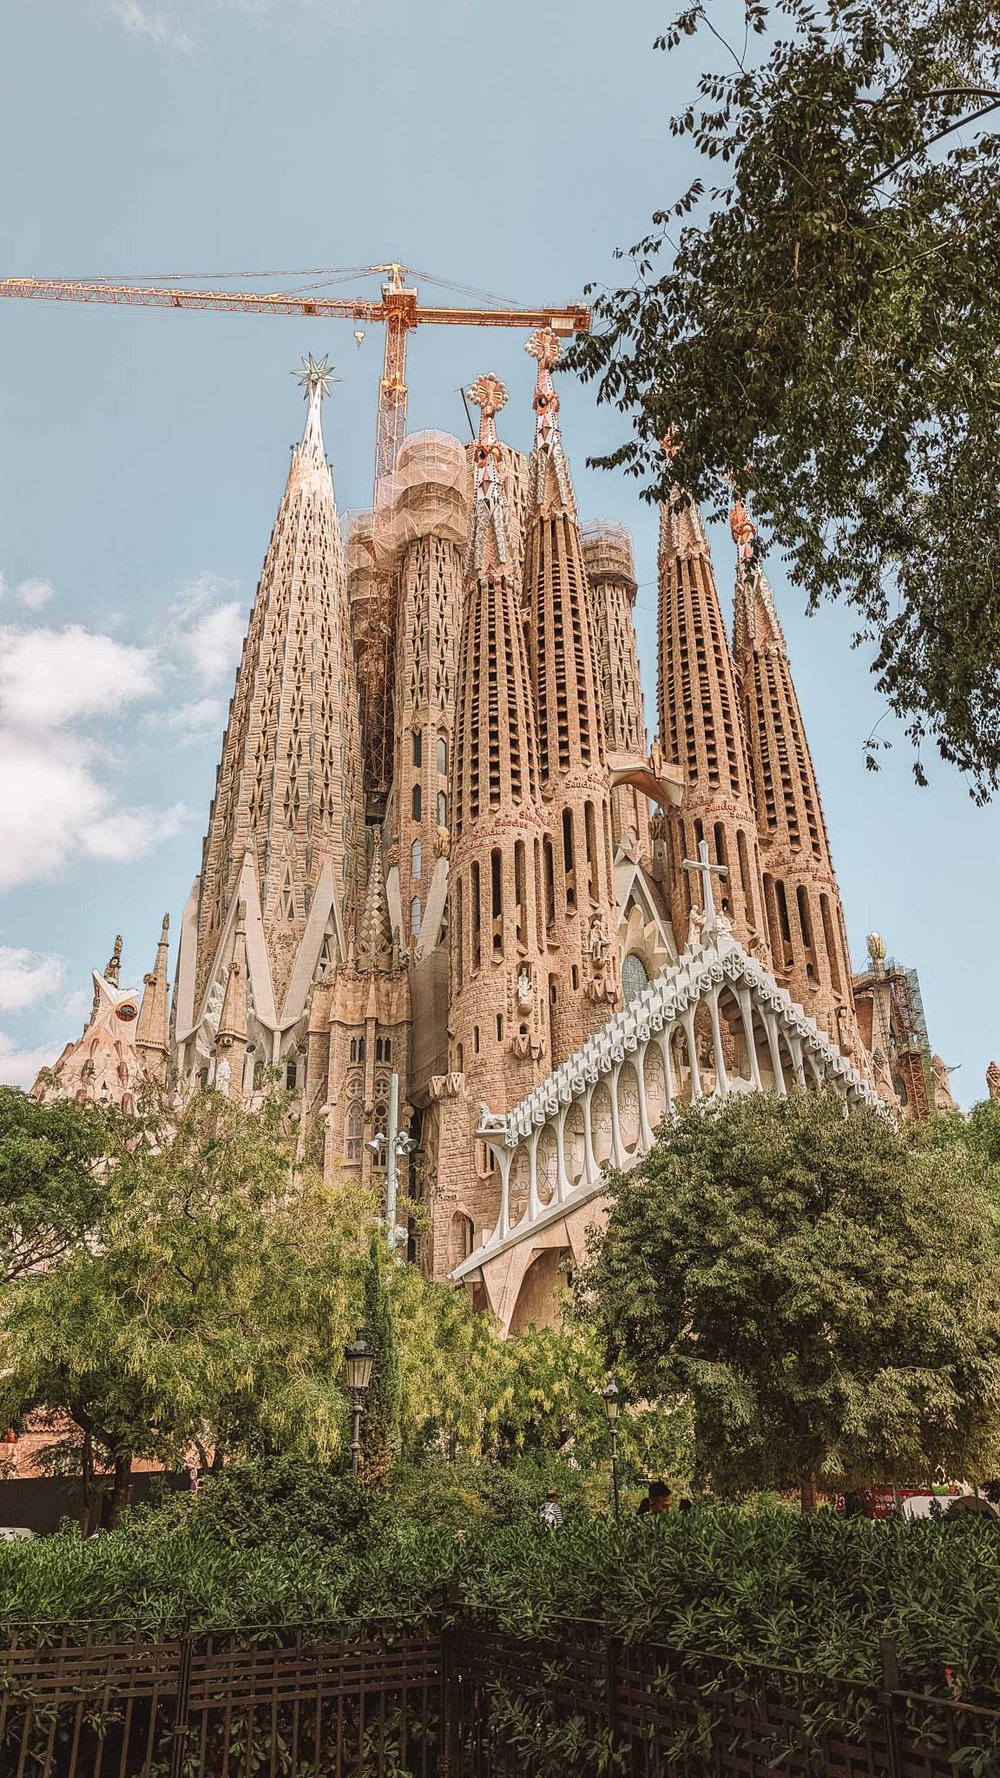 Barcelona 3-Day Adventure: What to See and Do